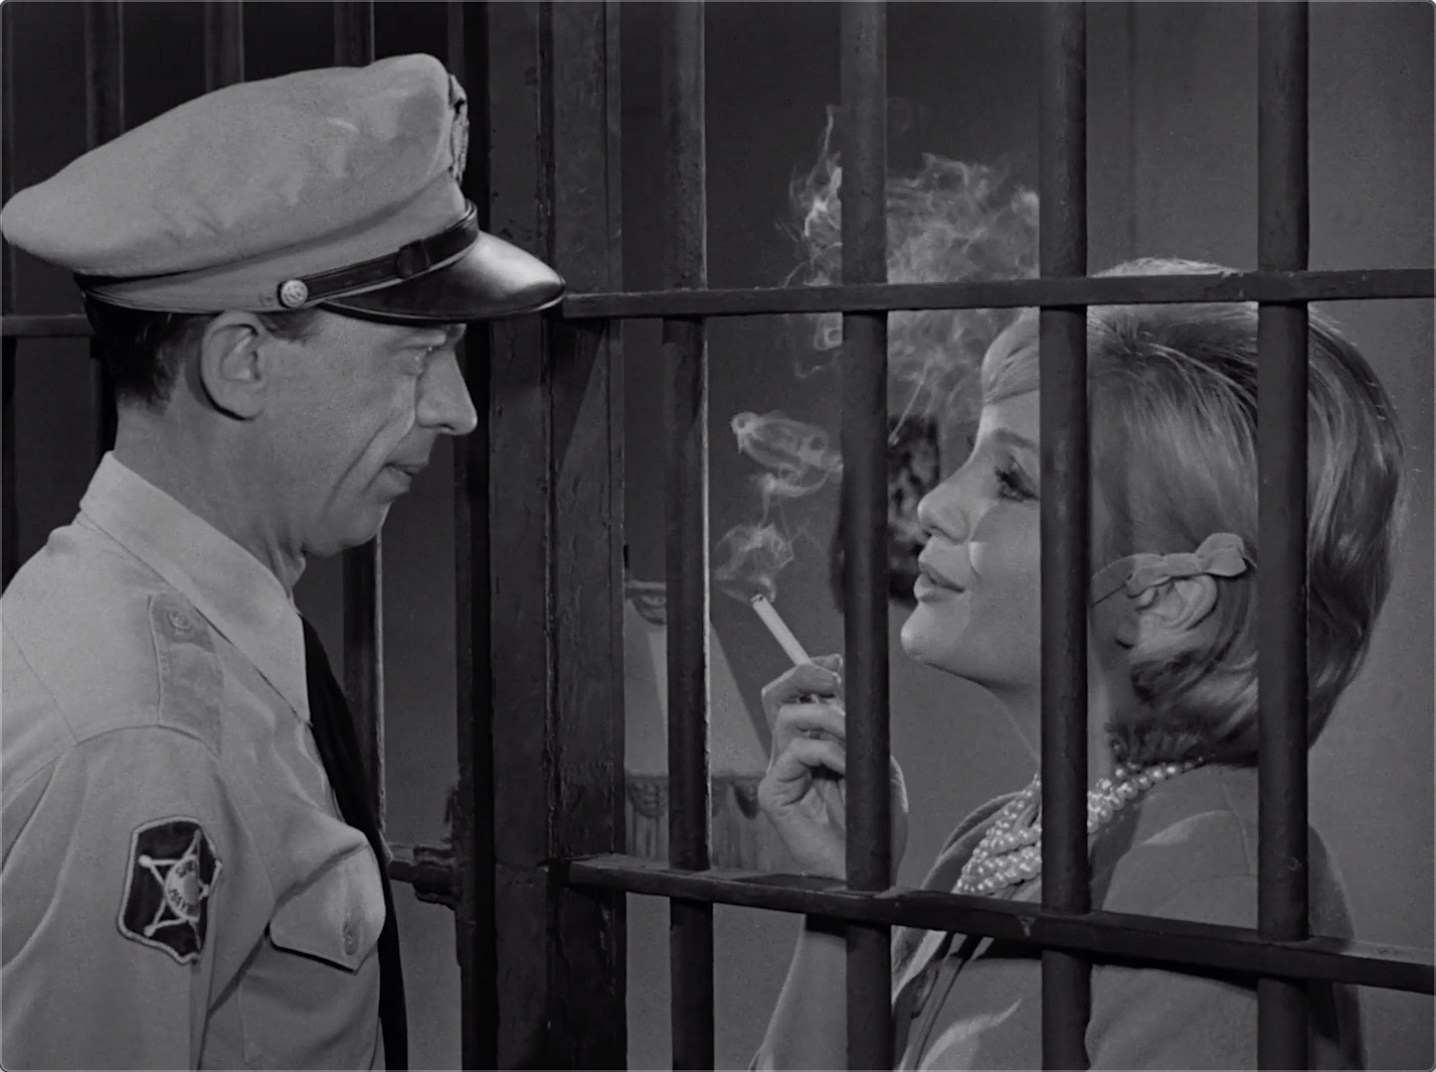 the-andy-griffith-show-s04e18-prisoner-of-love-feb-10-1964-45-jpg.185726